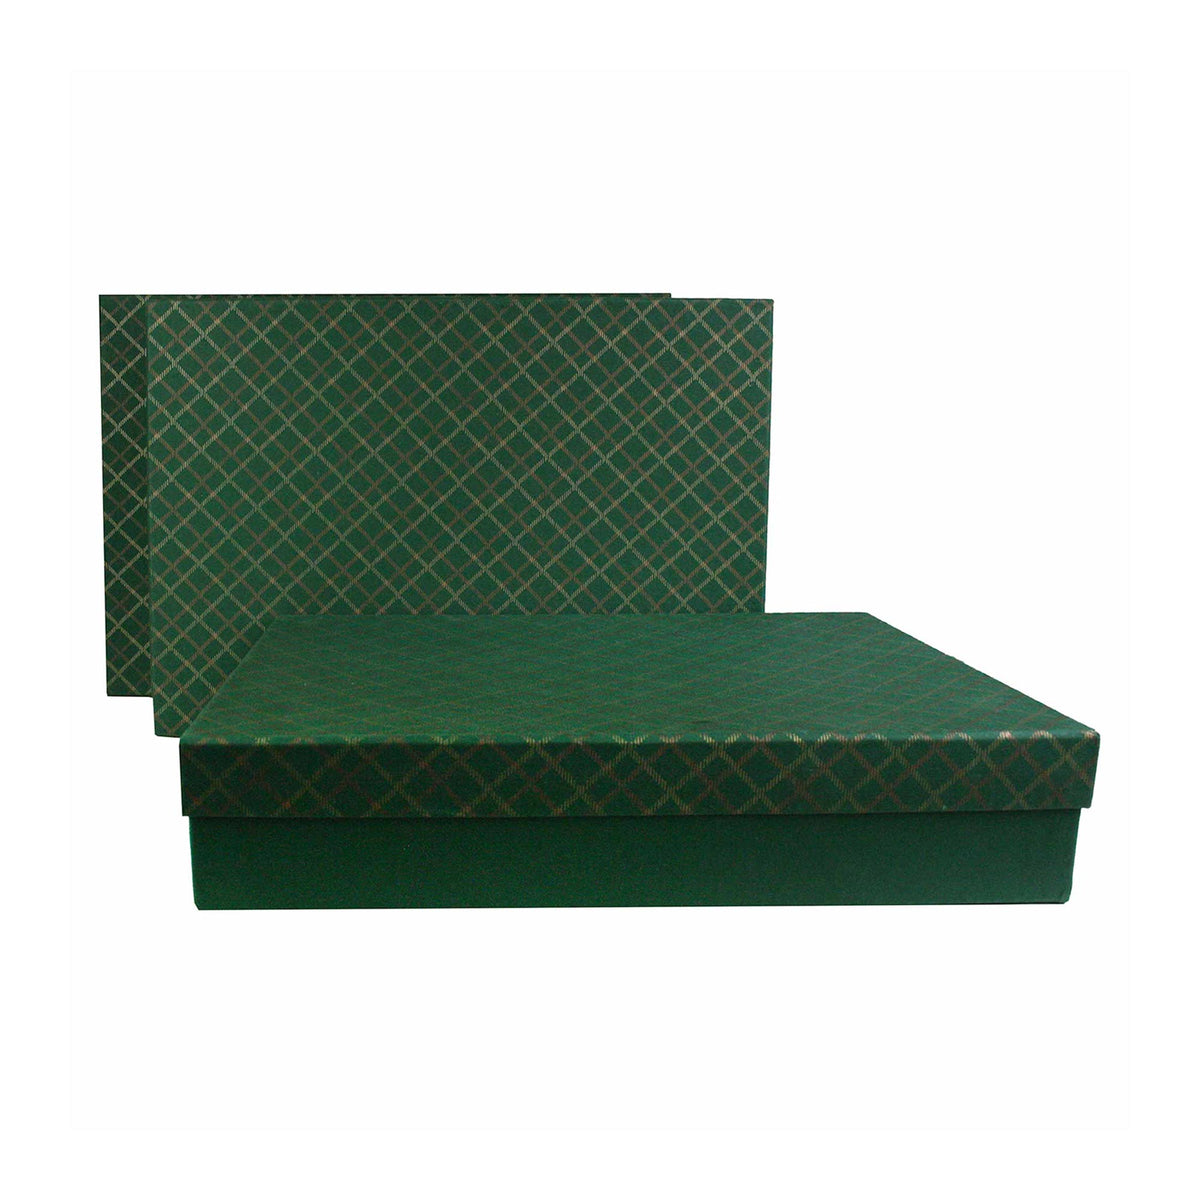 Handcrafted Chequered Green Gift Boxes  - Set of 3 (Sizes Available)